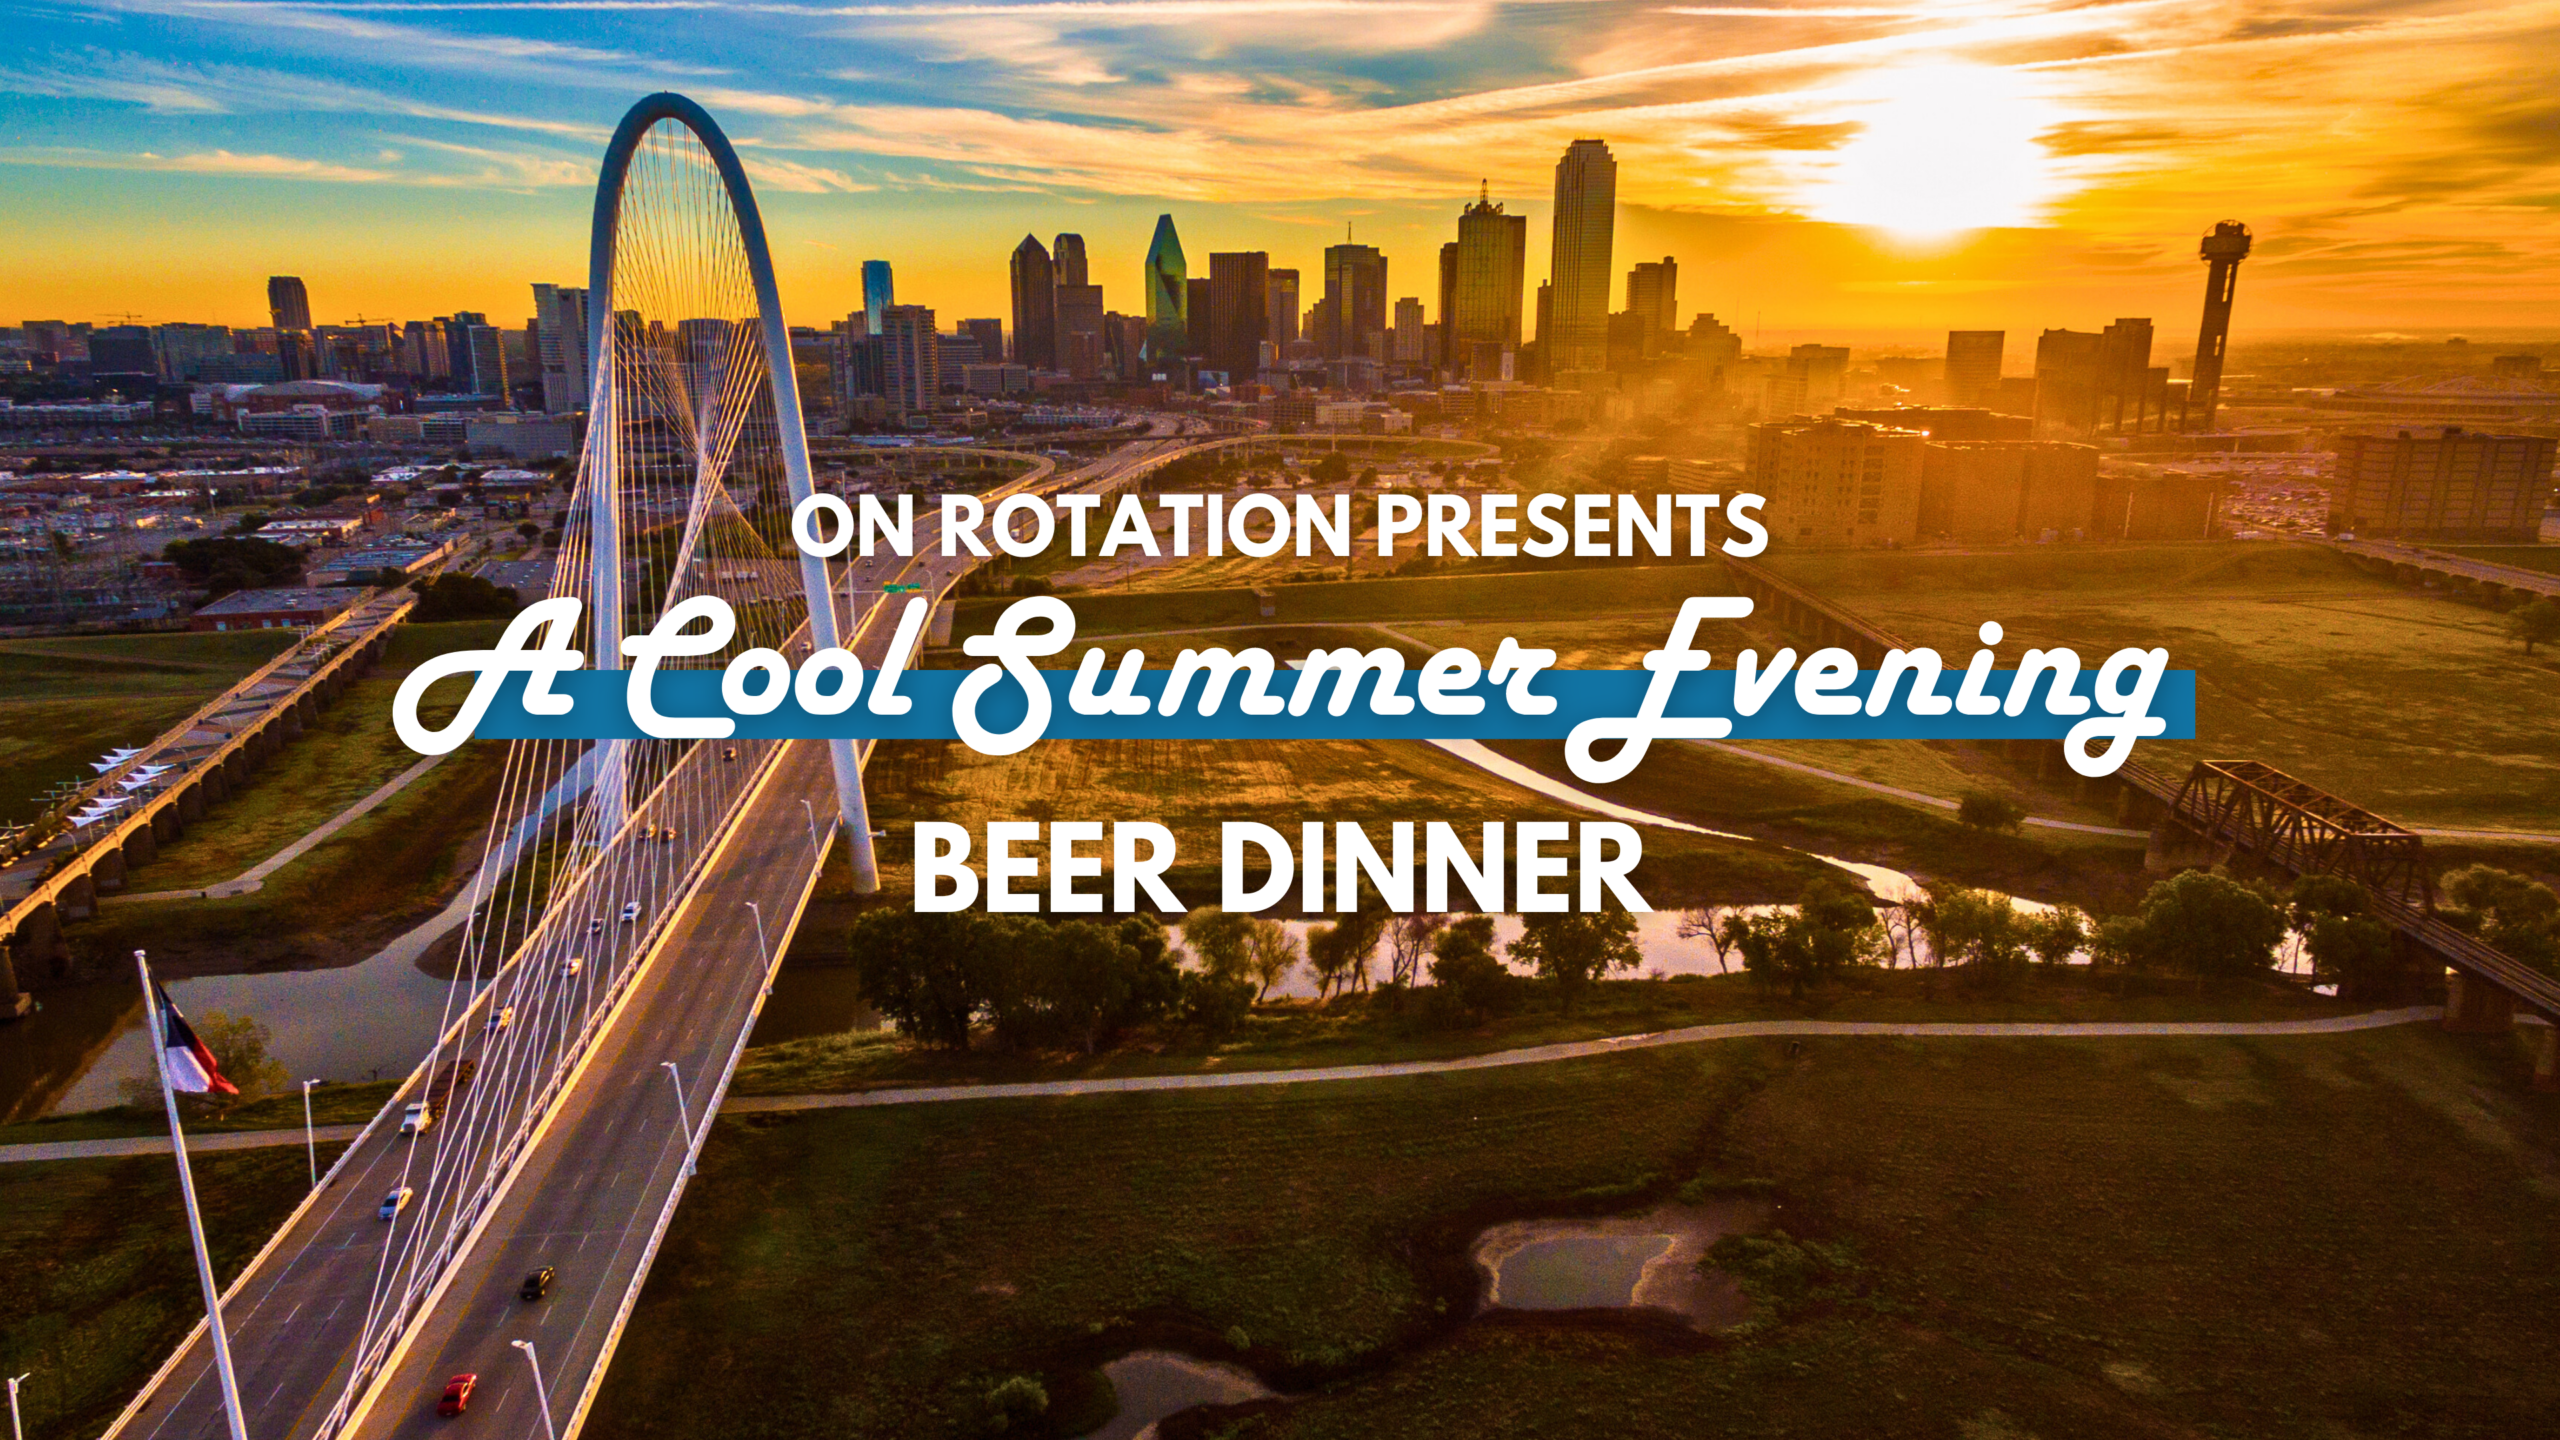 A Cool Summer Evening Beer Dinner at On Rotation